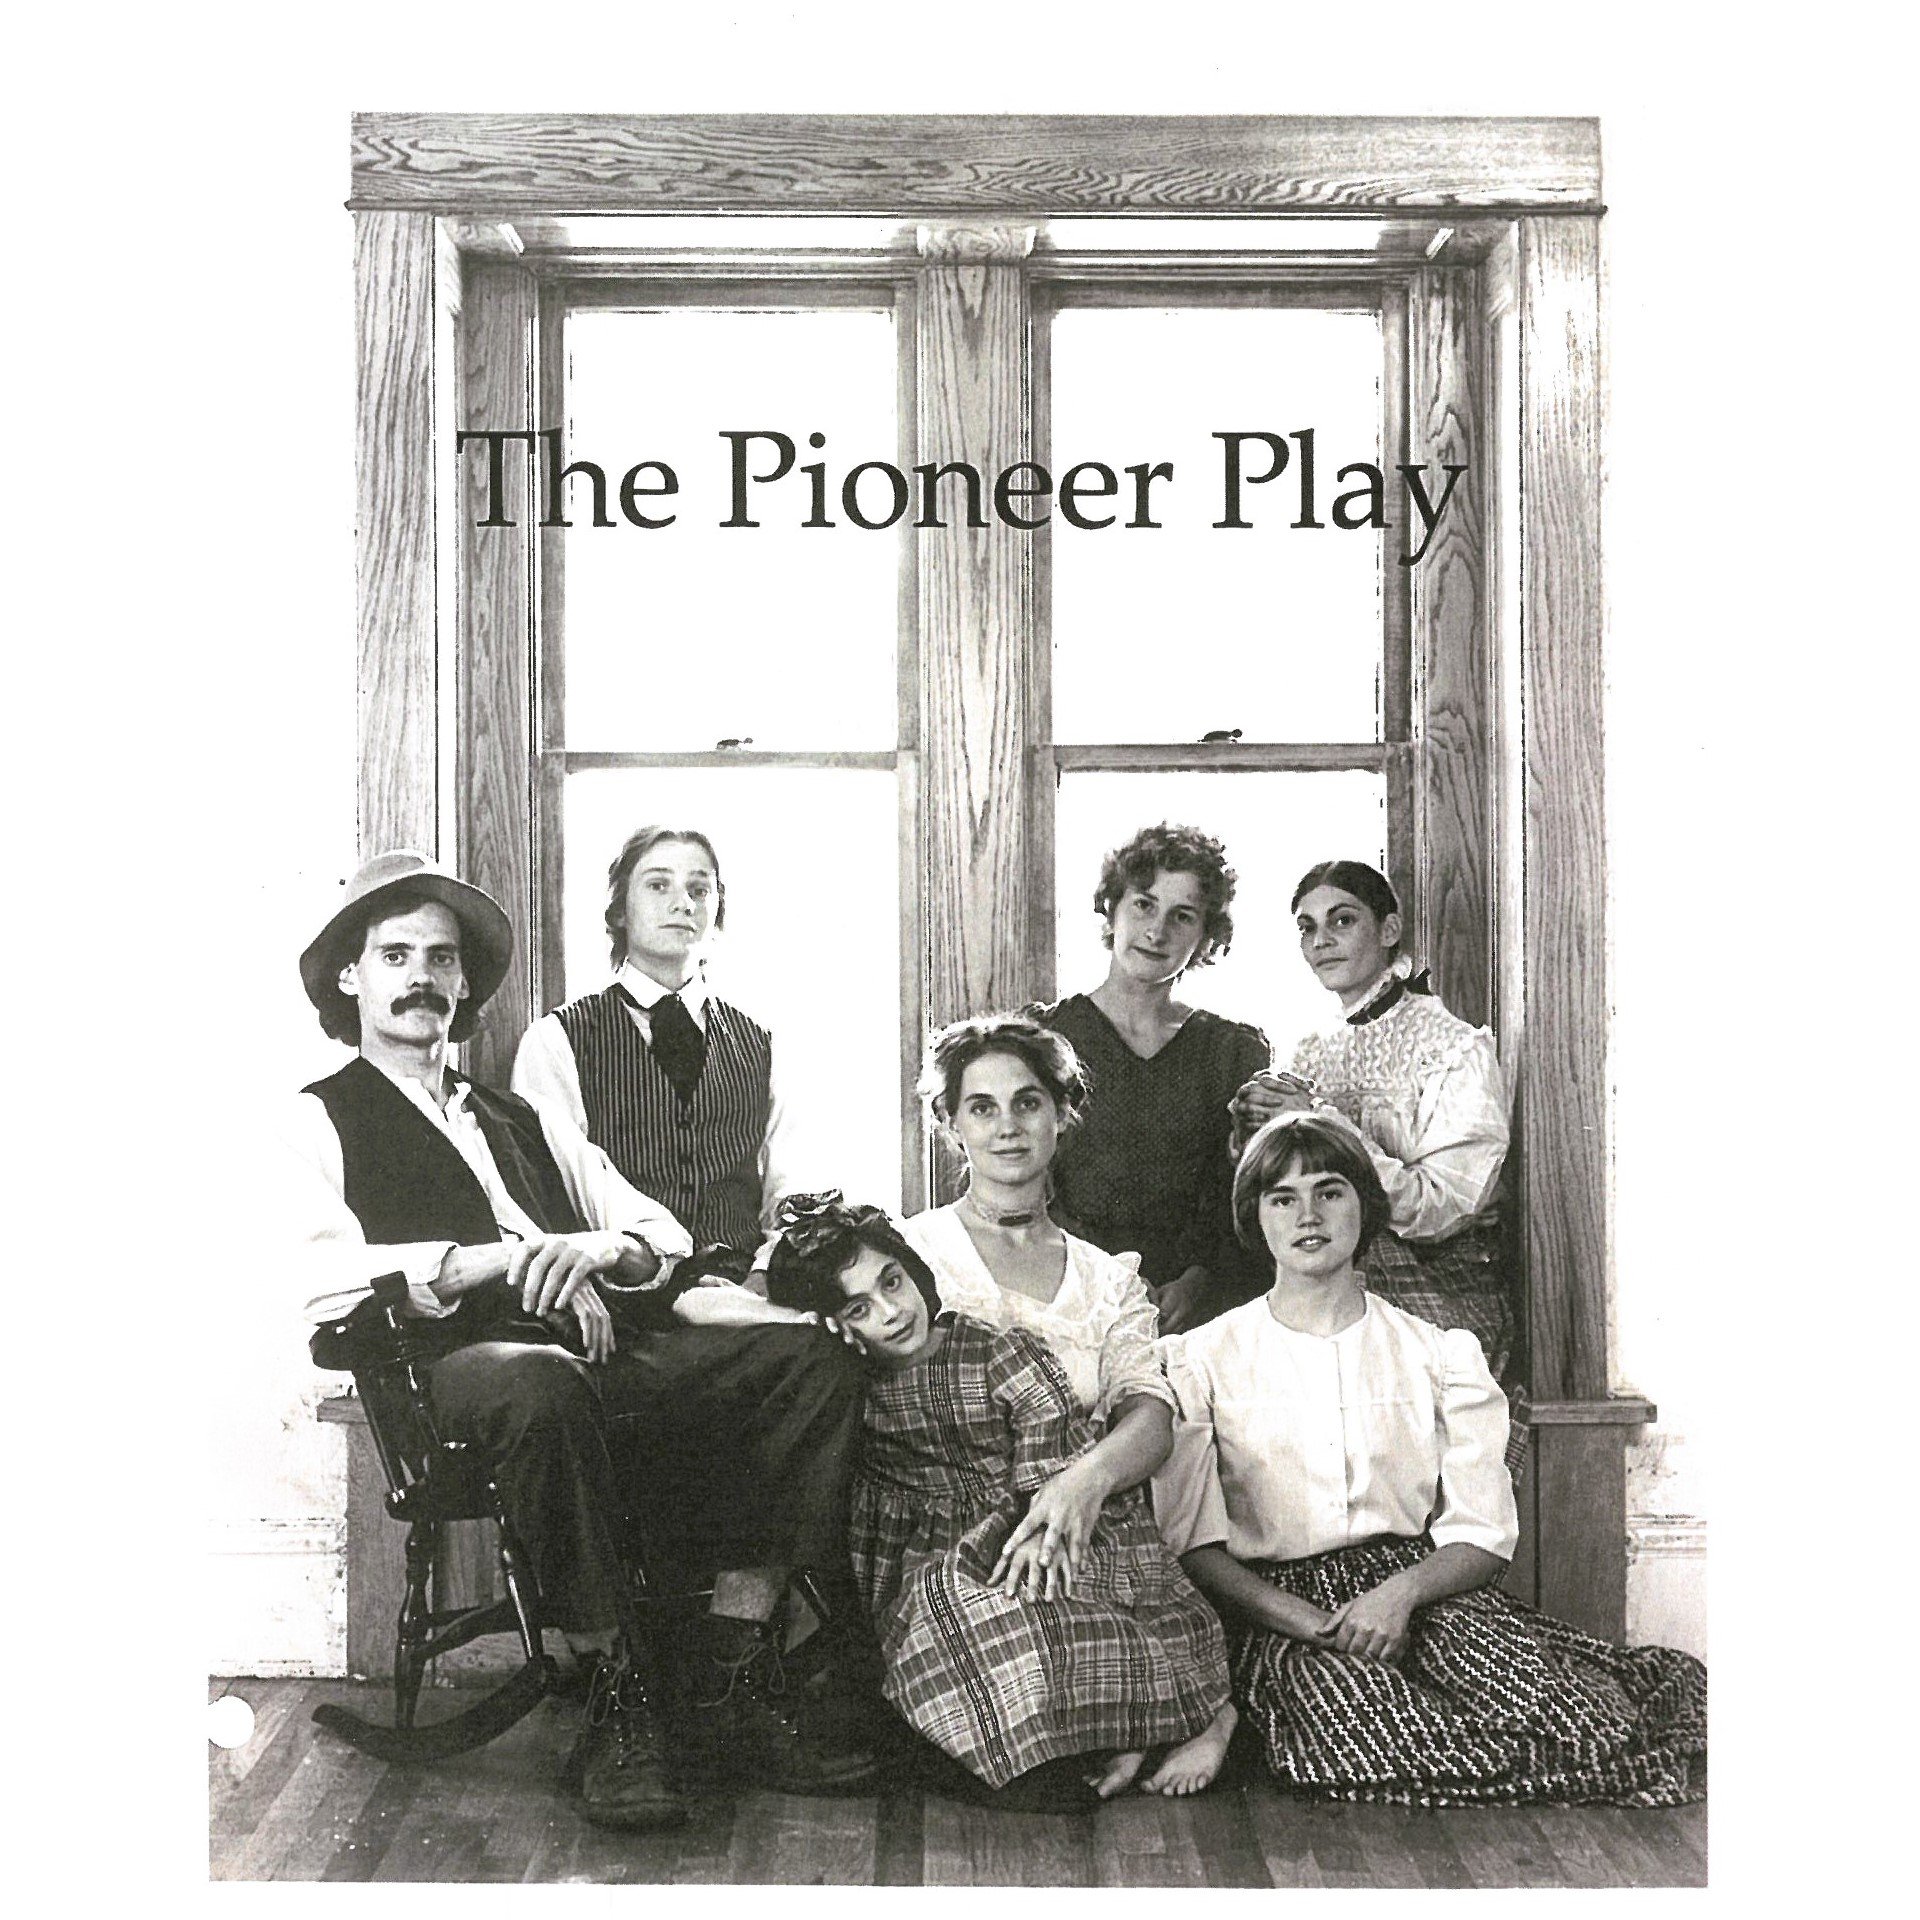 1975 - The Pioneer Play